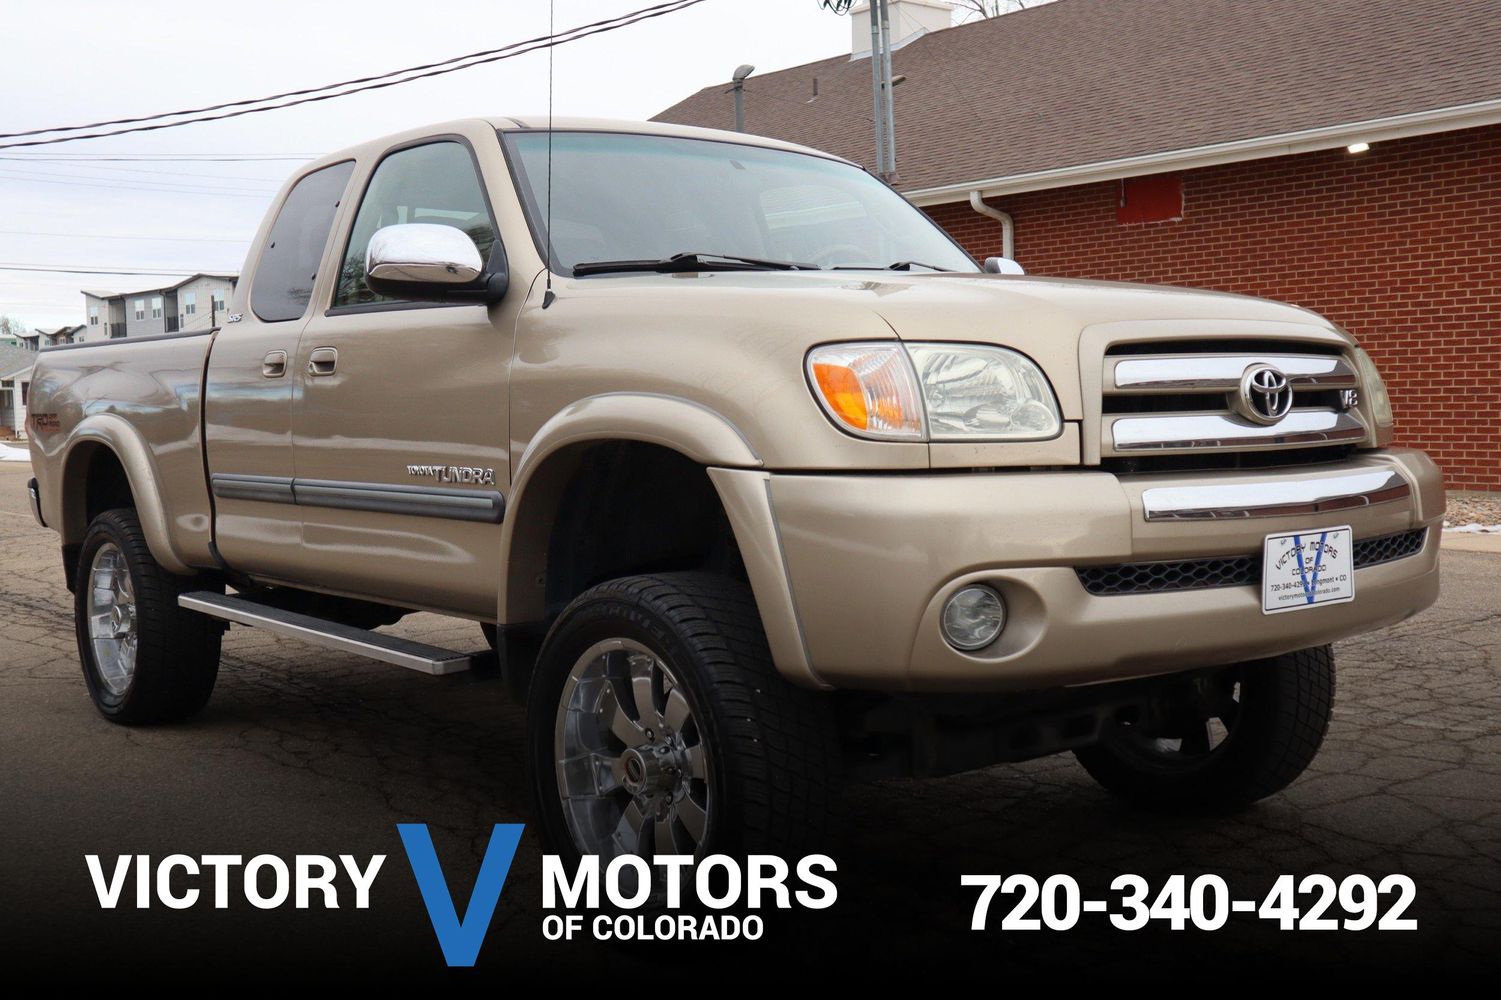 Introduce 129+ images 2006 toyota tundra gas tank size In